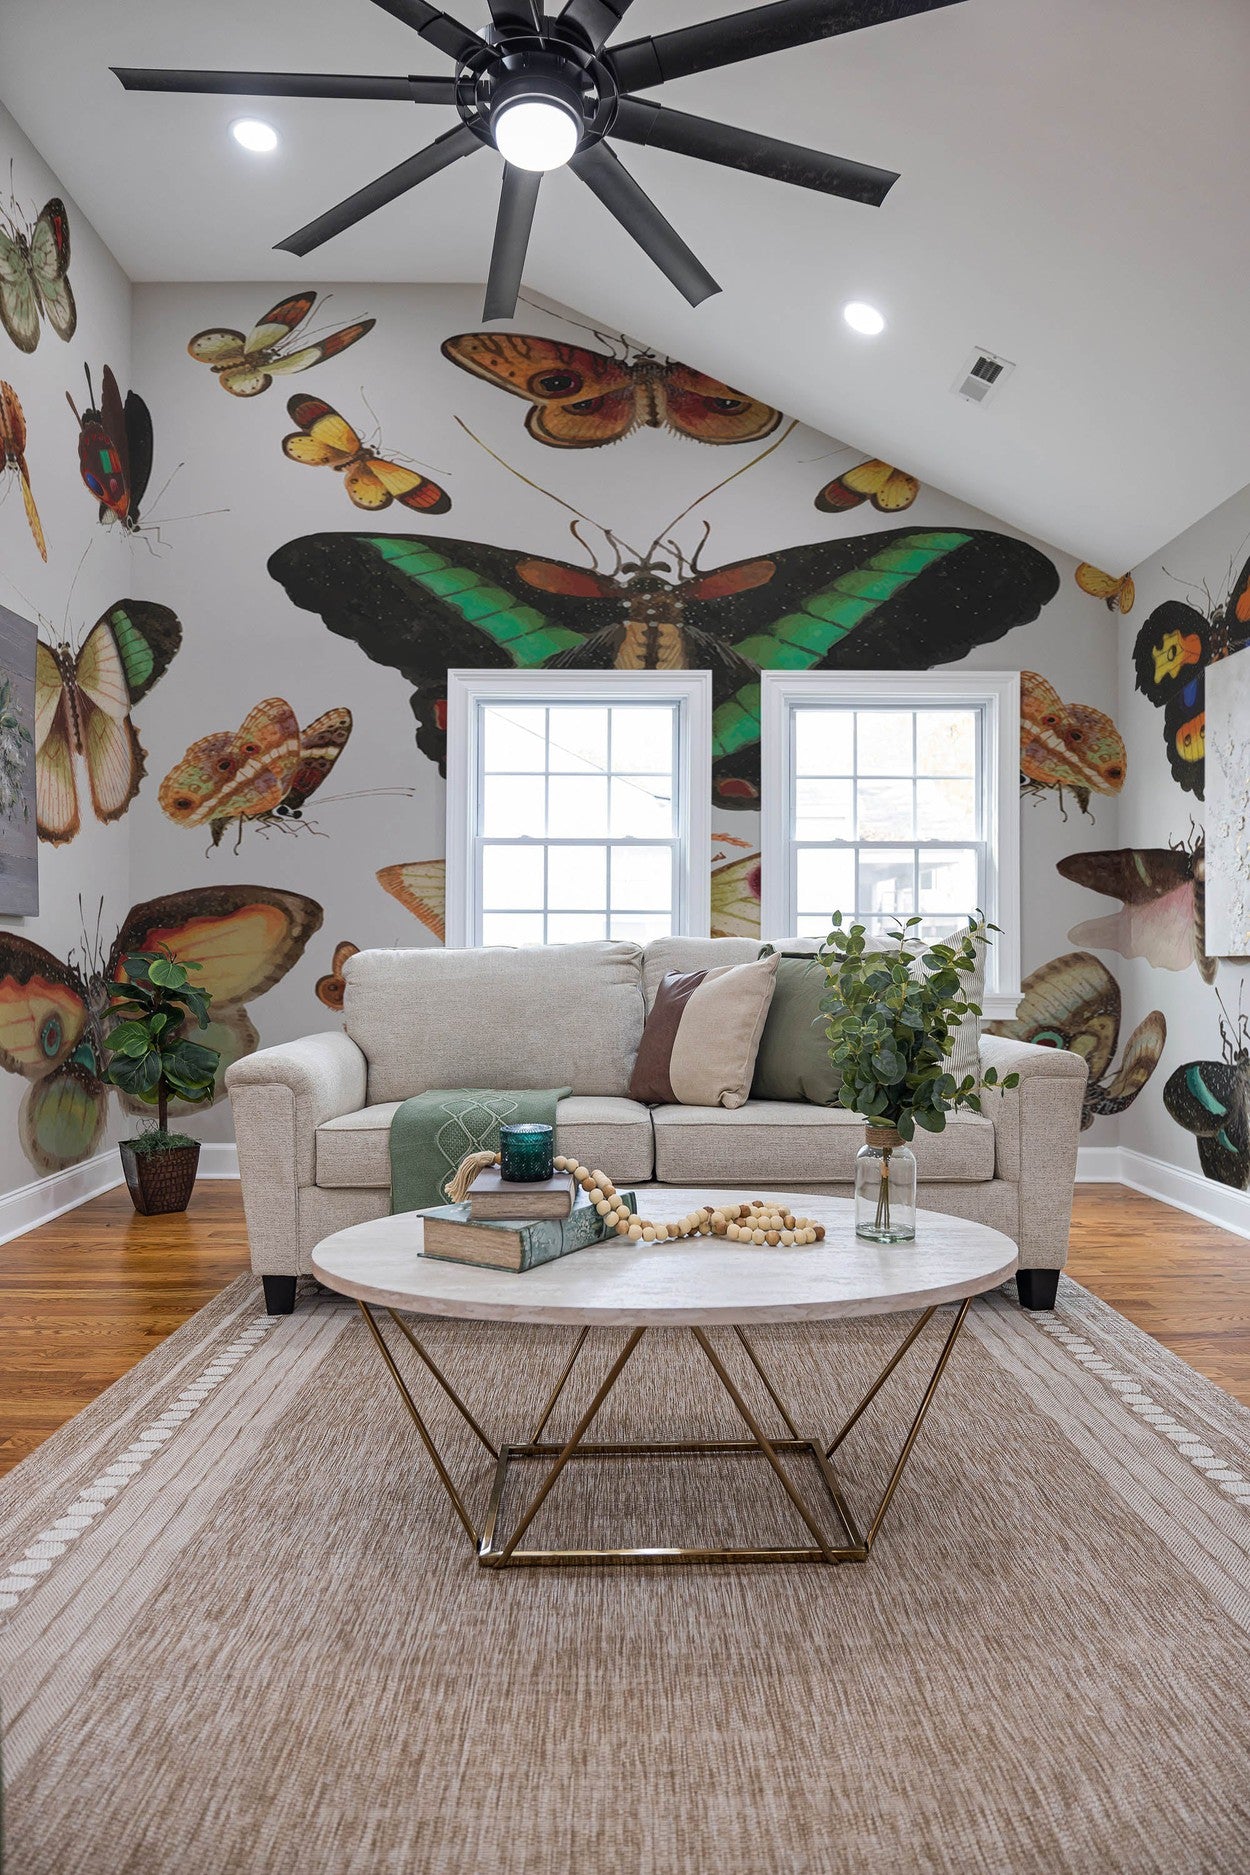 A cozy living room interior featuring a large wall mural of colorful butterflies, with a beige sofa, round coffee table, and a ceiling fan